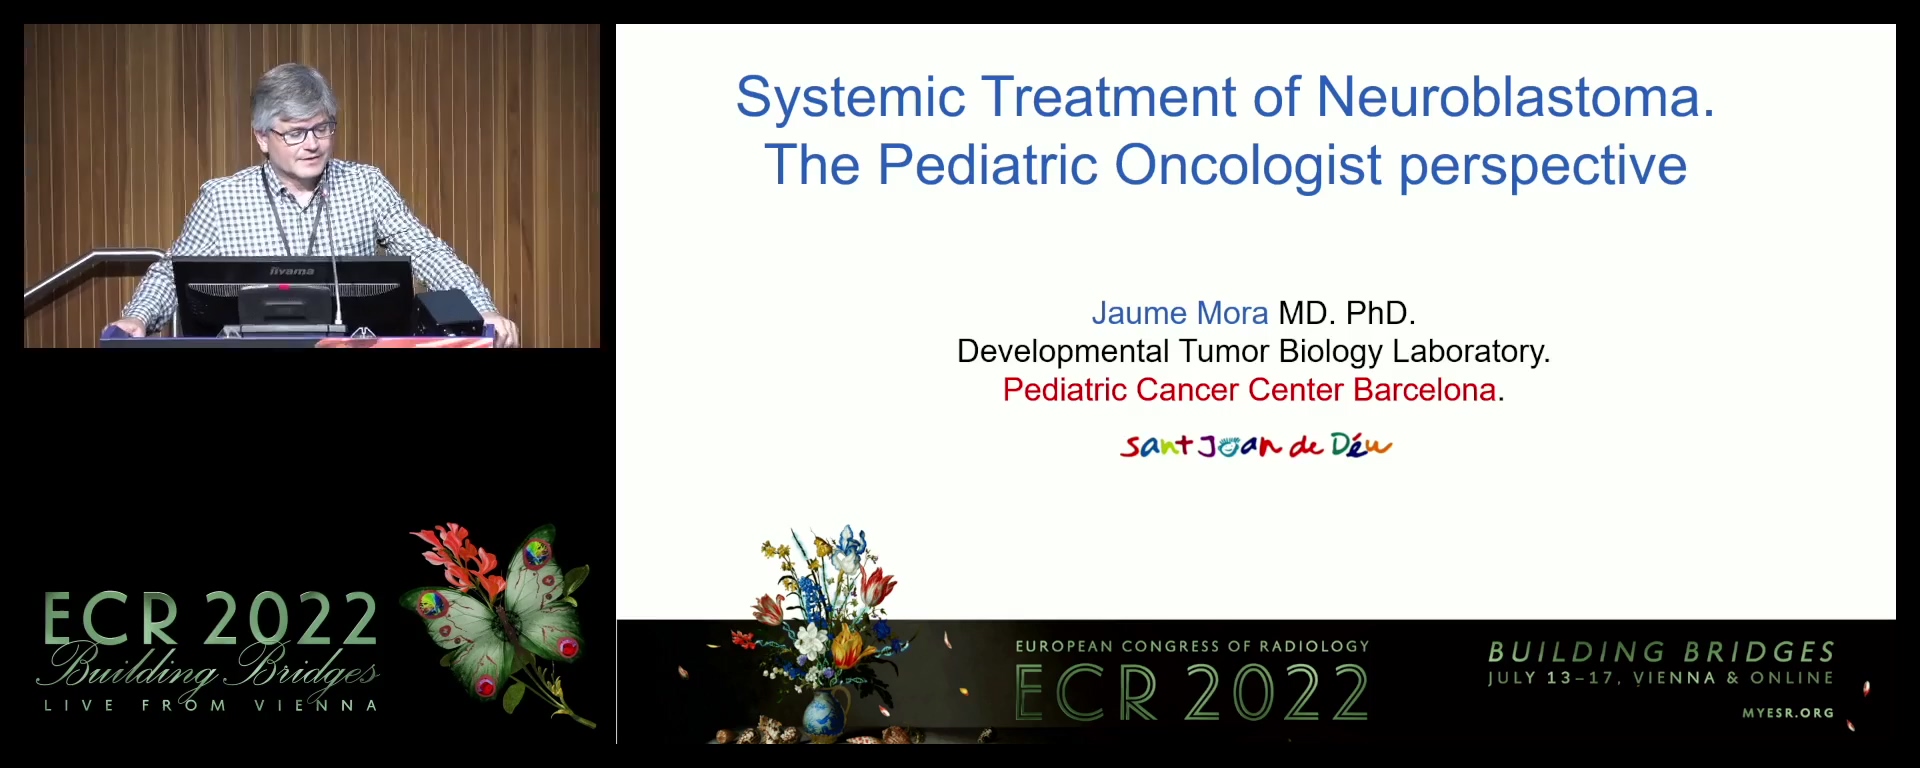 Systemic treatment and radiation therapy of neuroblastoma: the oncologist's perspective